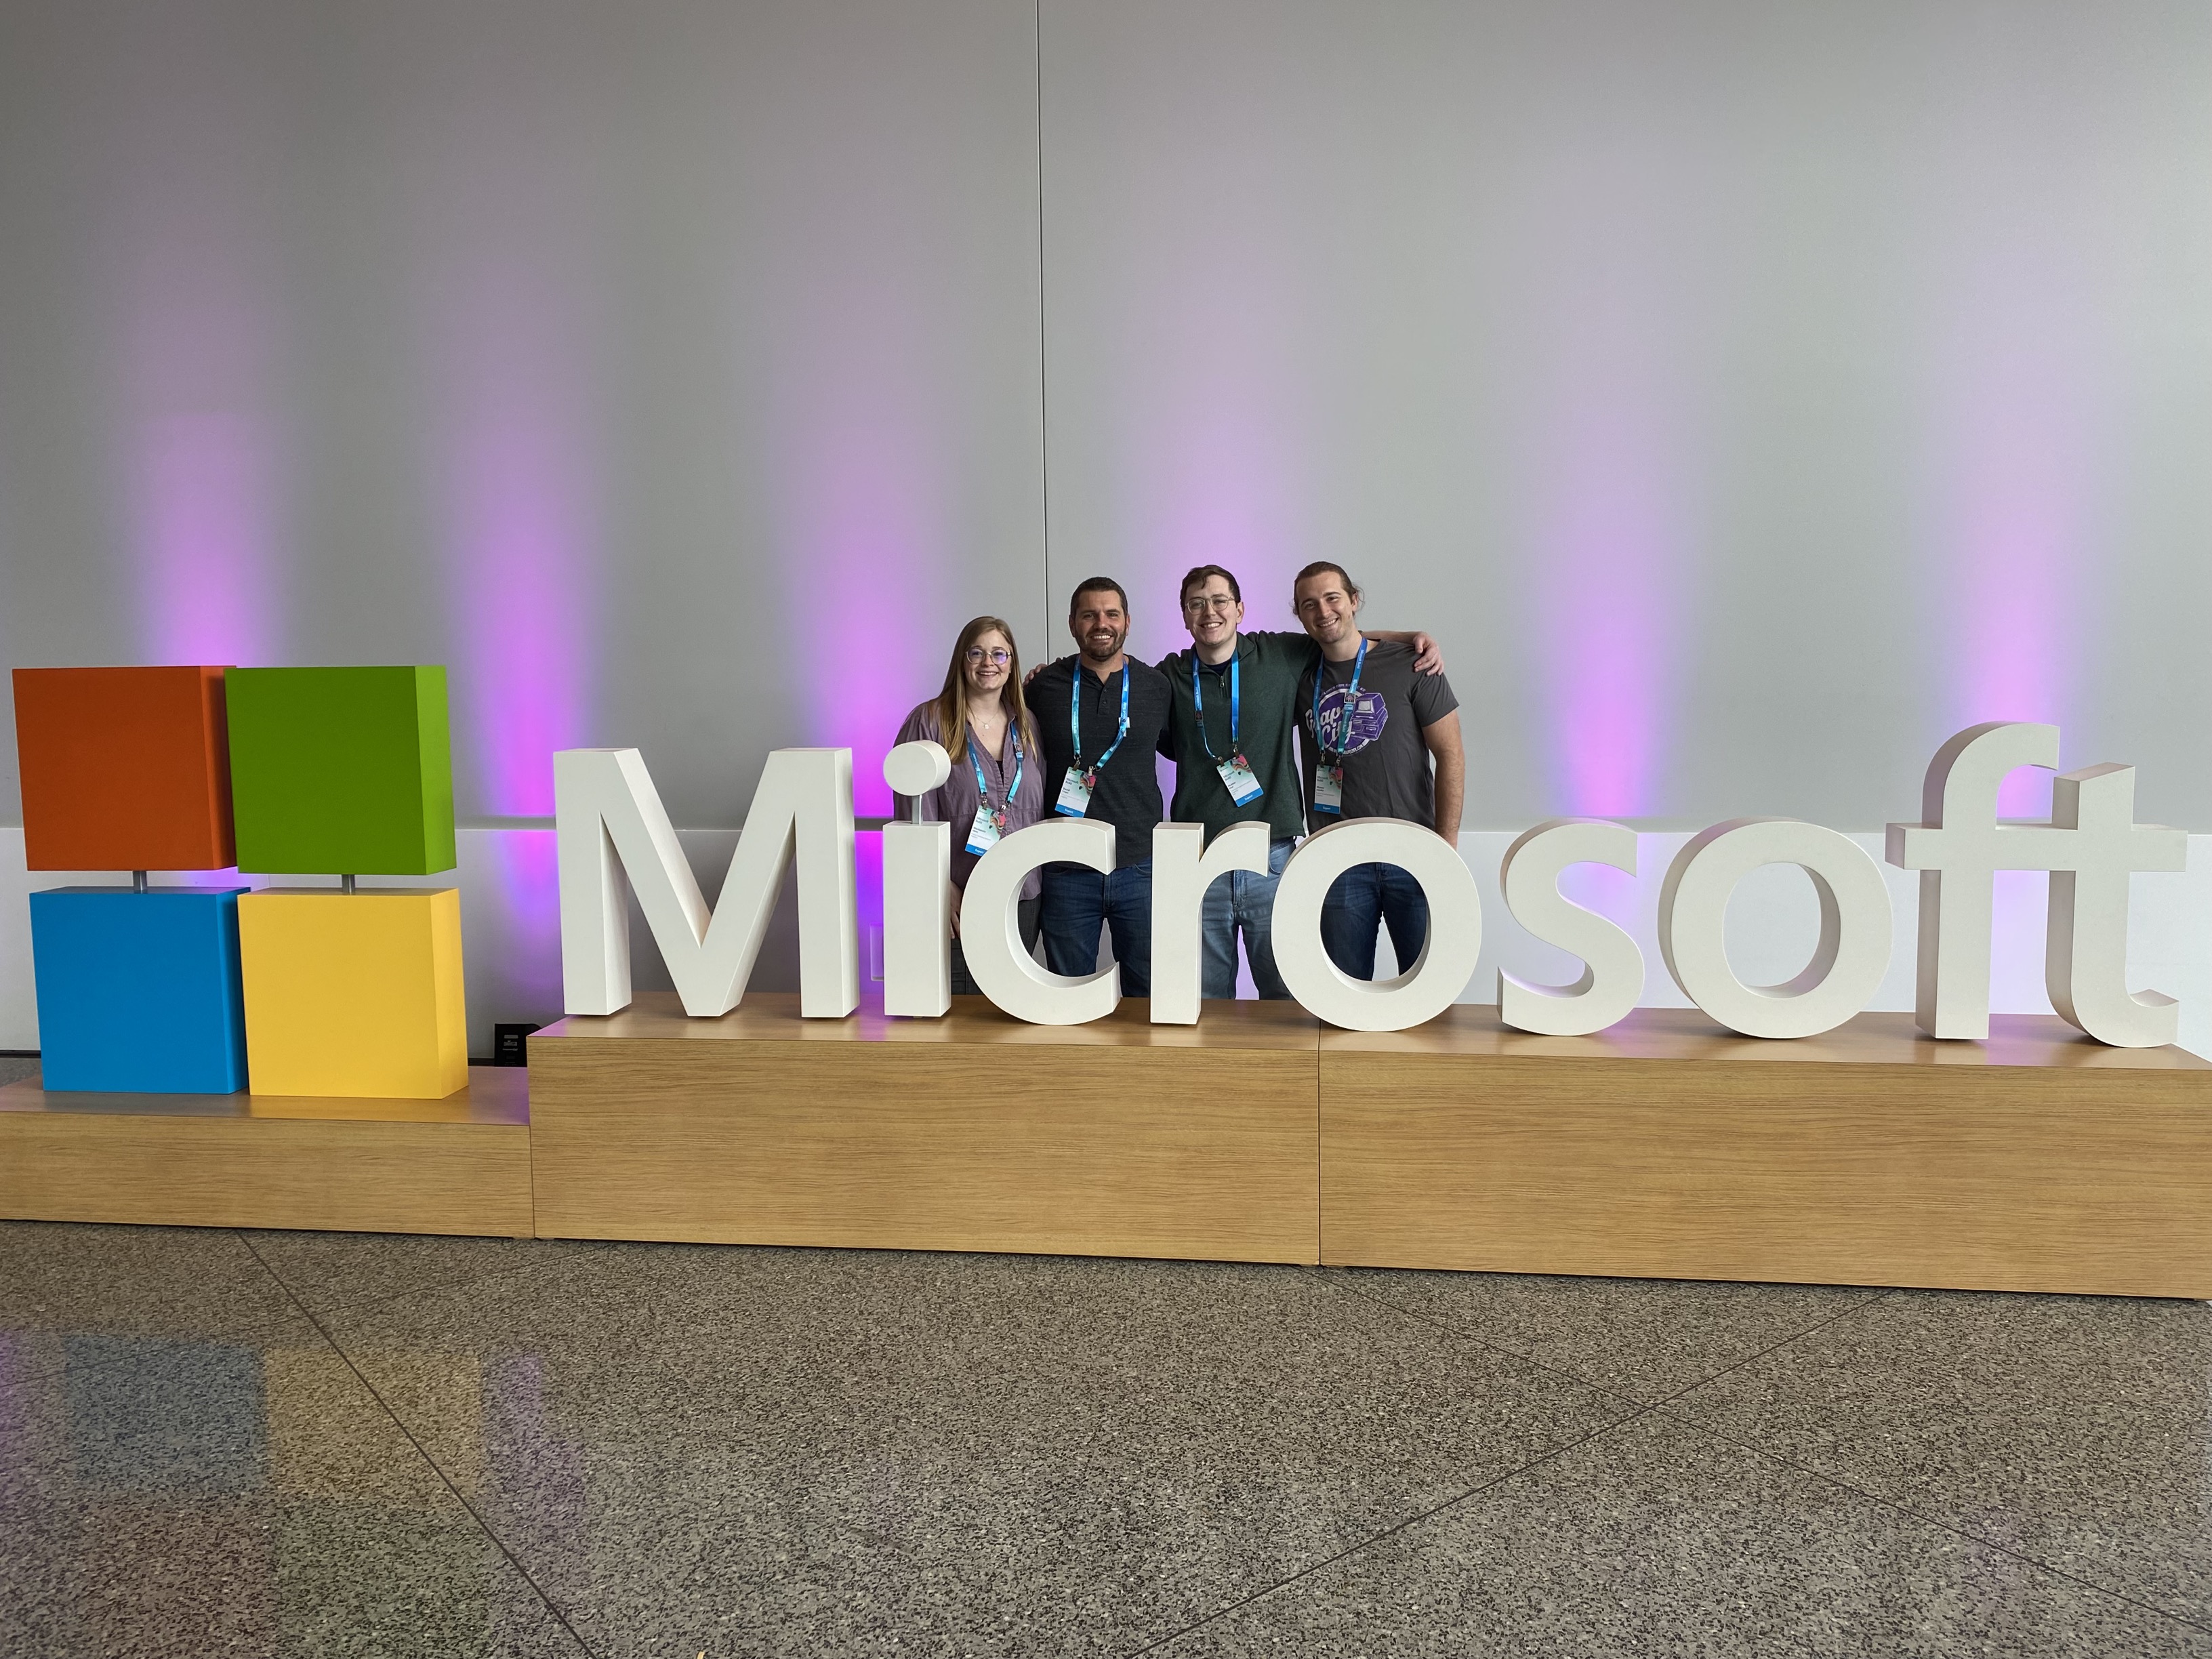 The GrapeCity Exhibiting Team at the Microsoft Sign